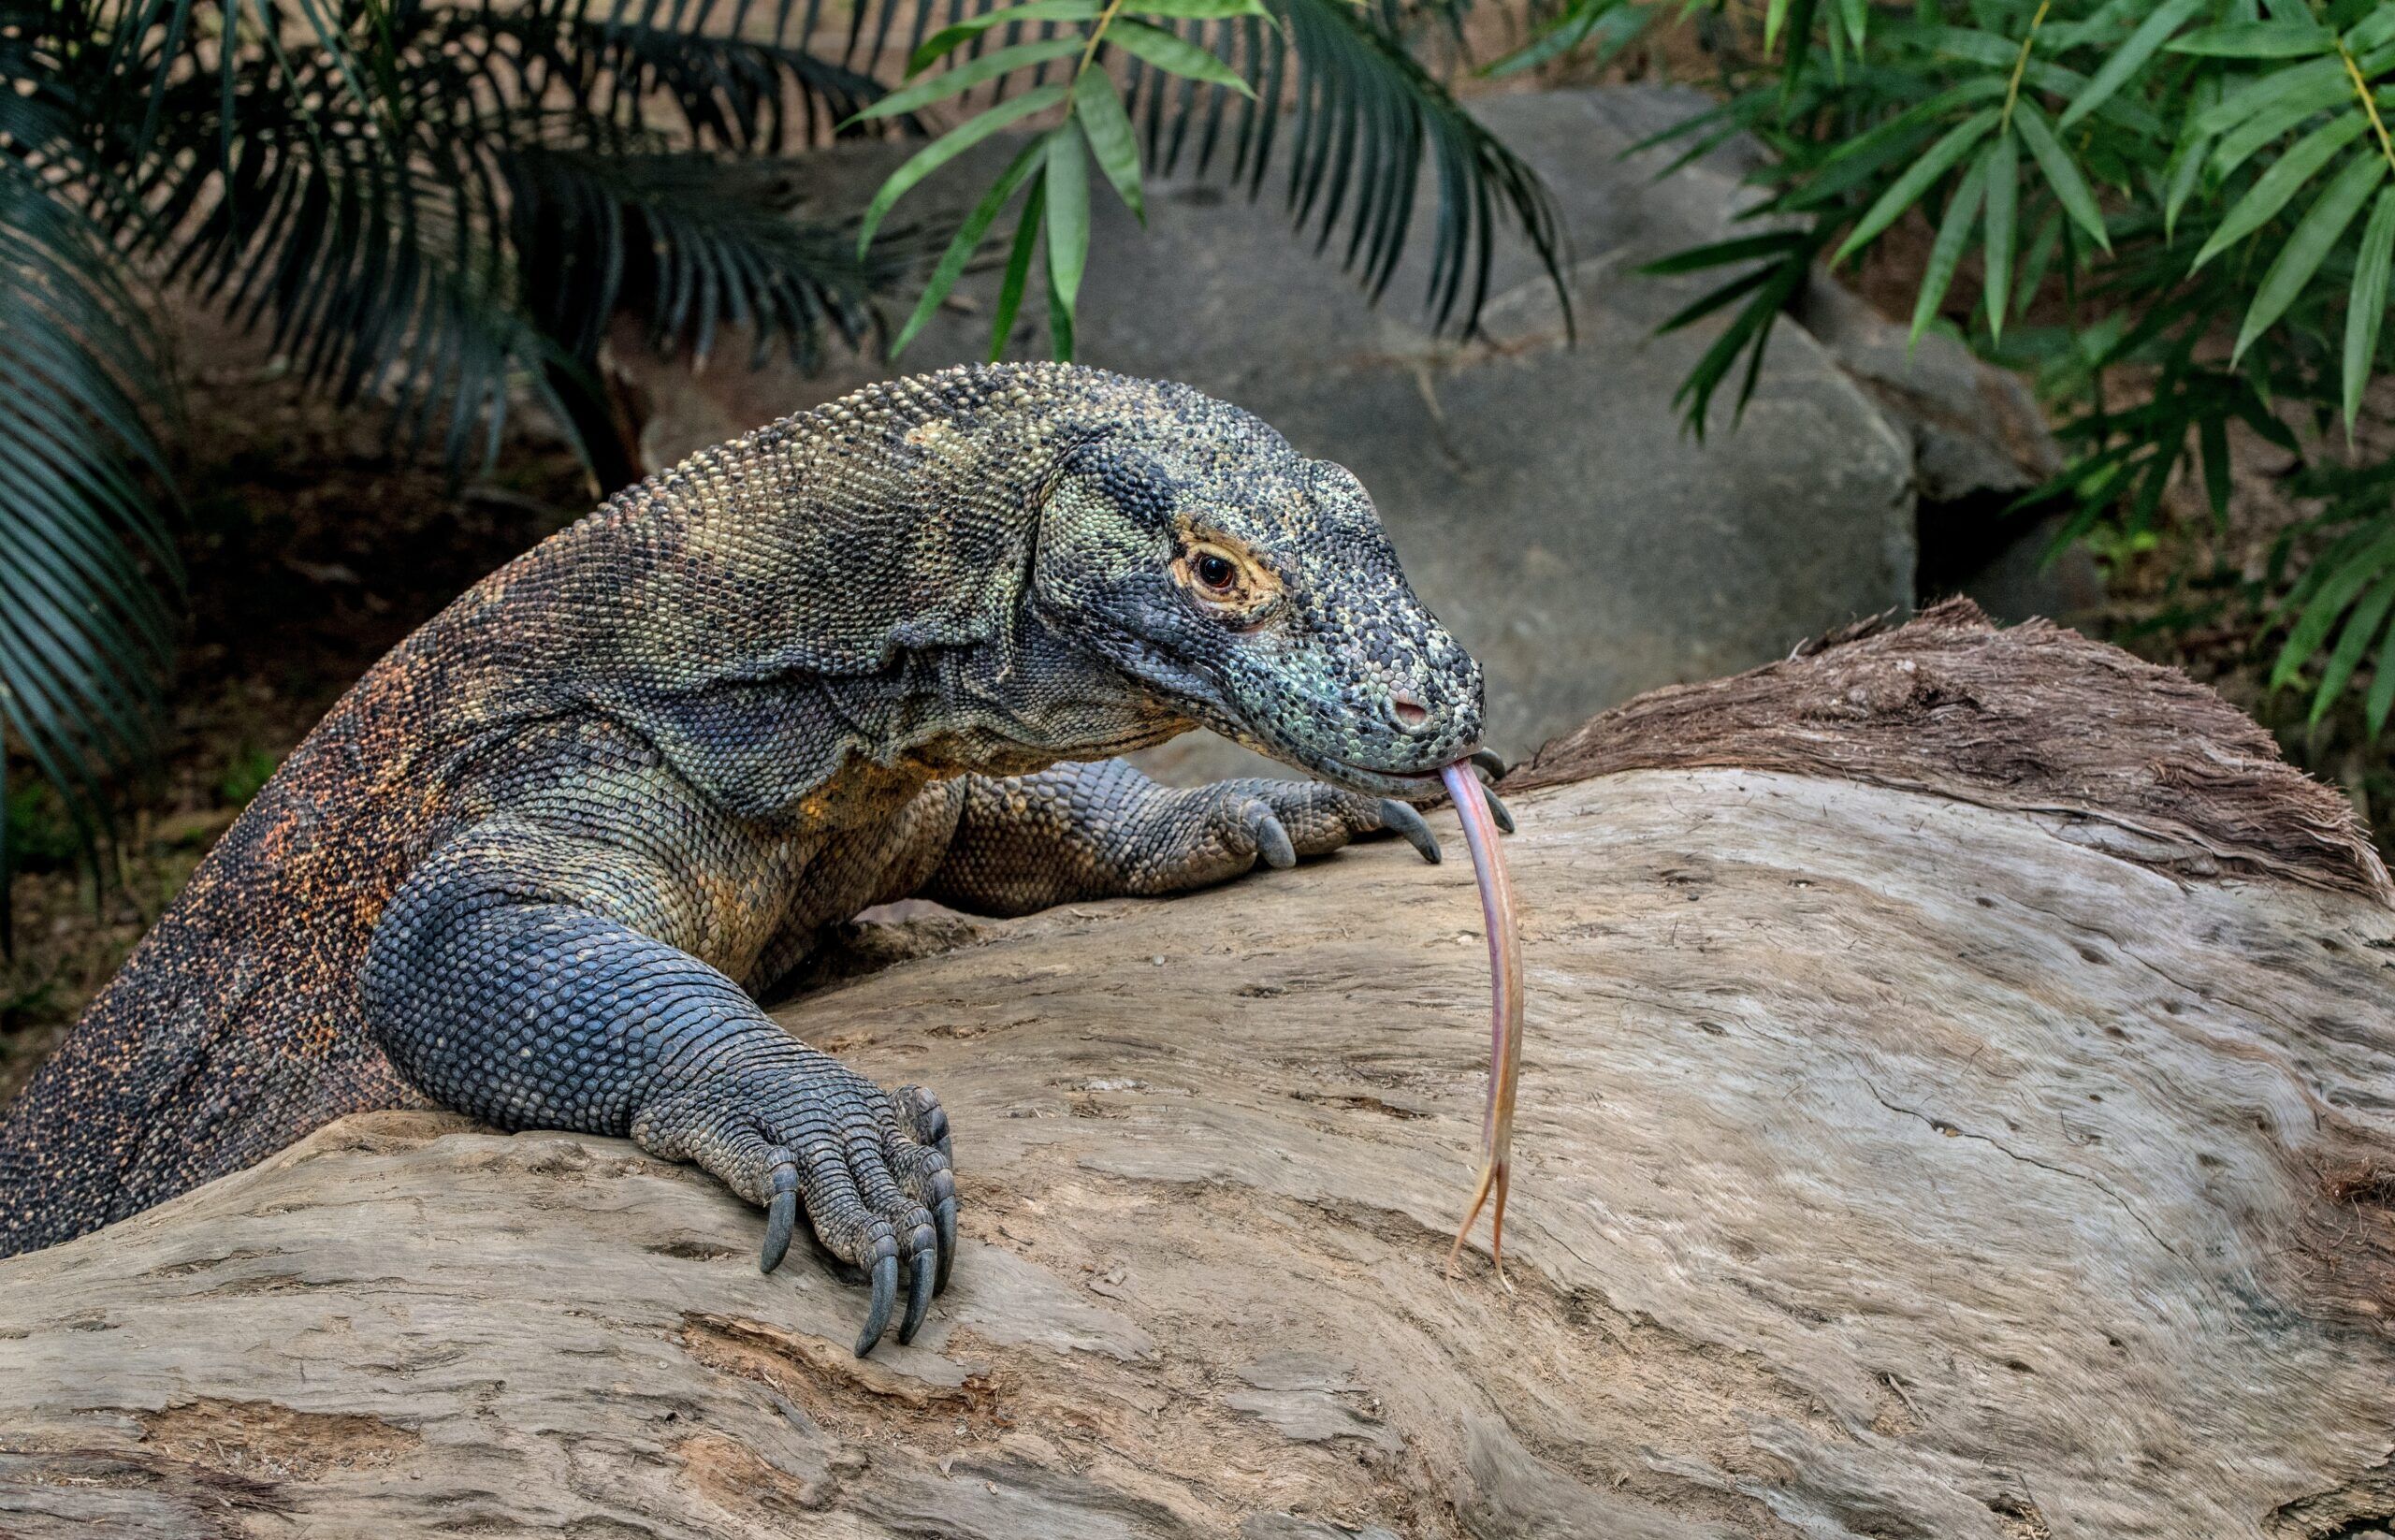 The Komodo dragon, an asexual animal, in a natural habitat with its tongue out